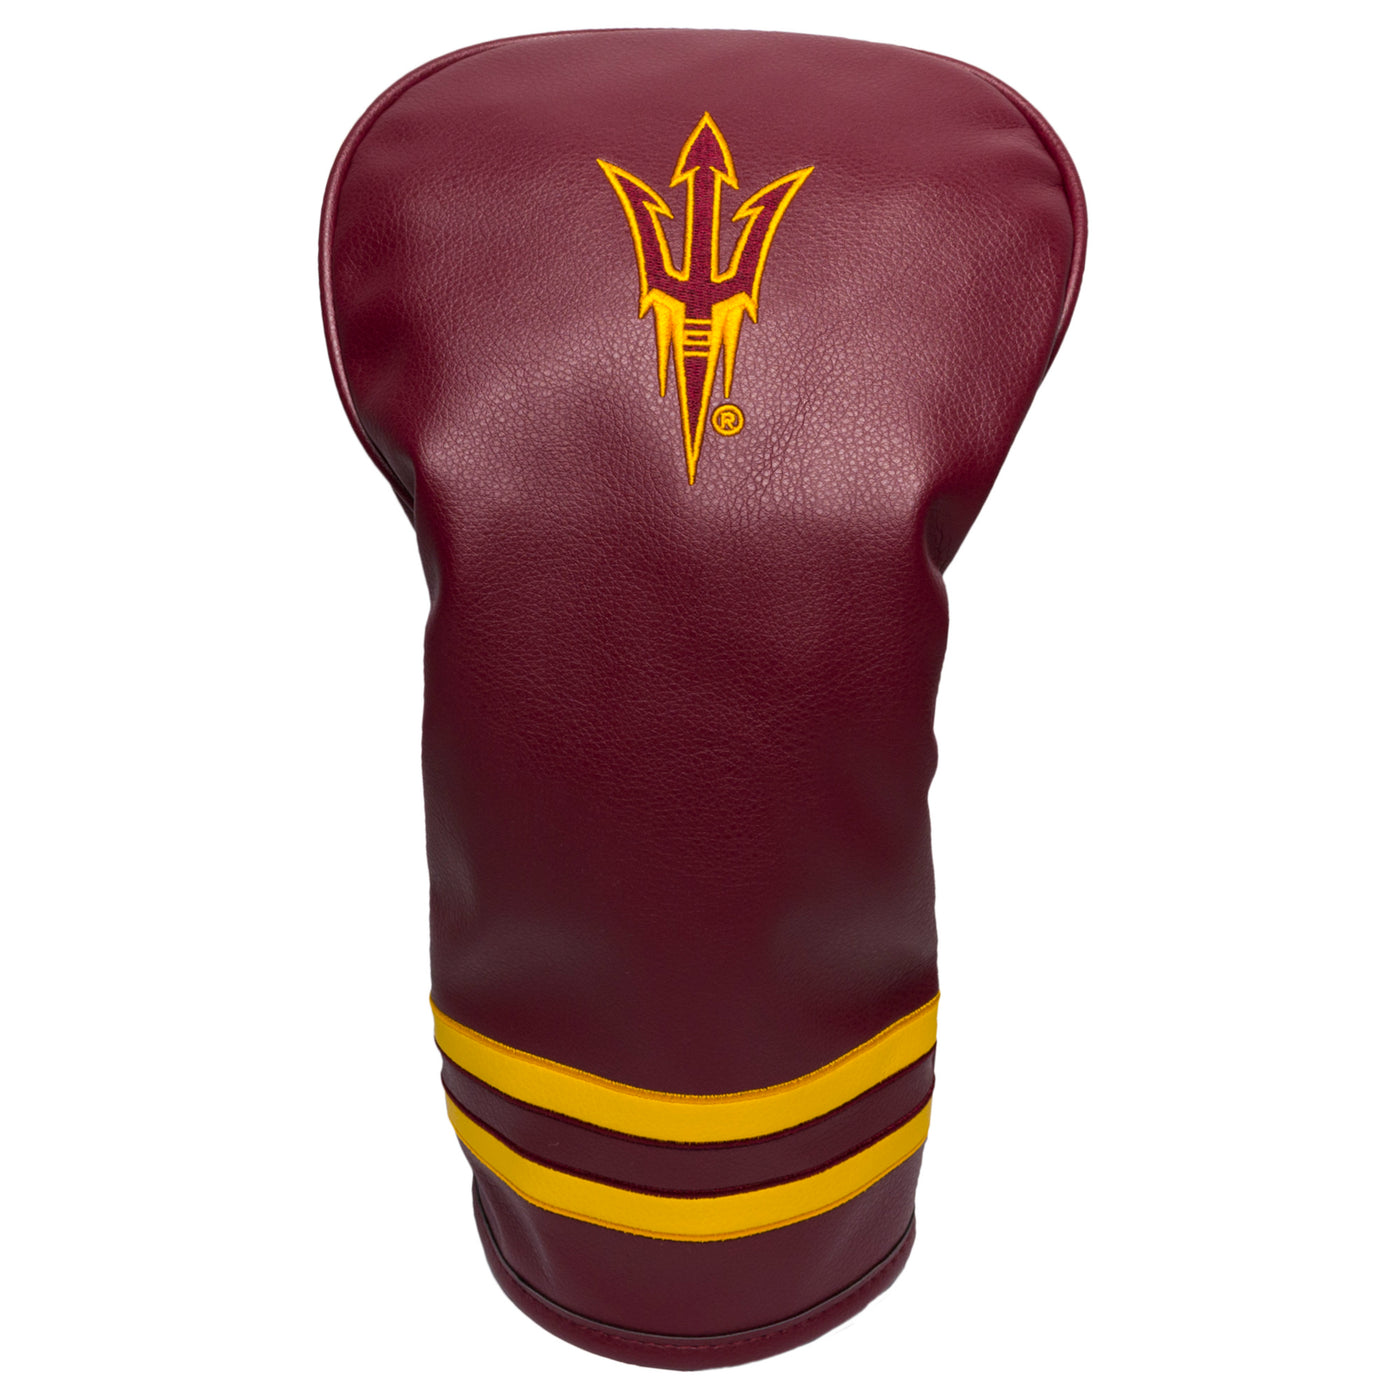 ASU leather like maroon material with embroidered pitchfork at the top and 2 gold stripes near the base